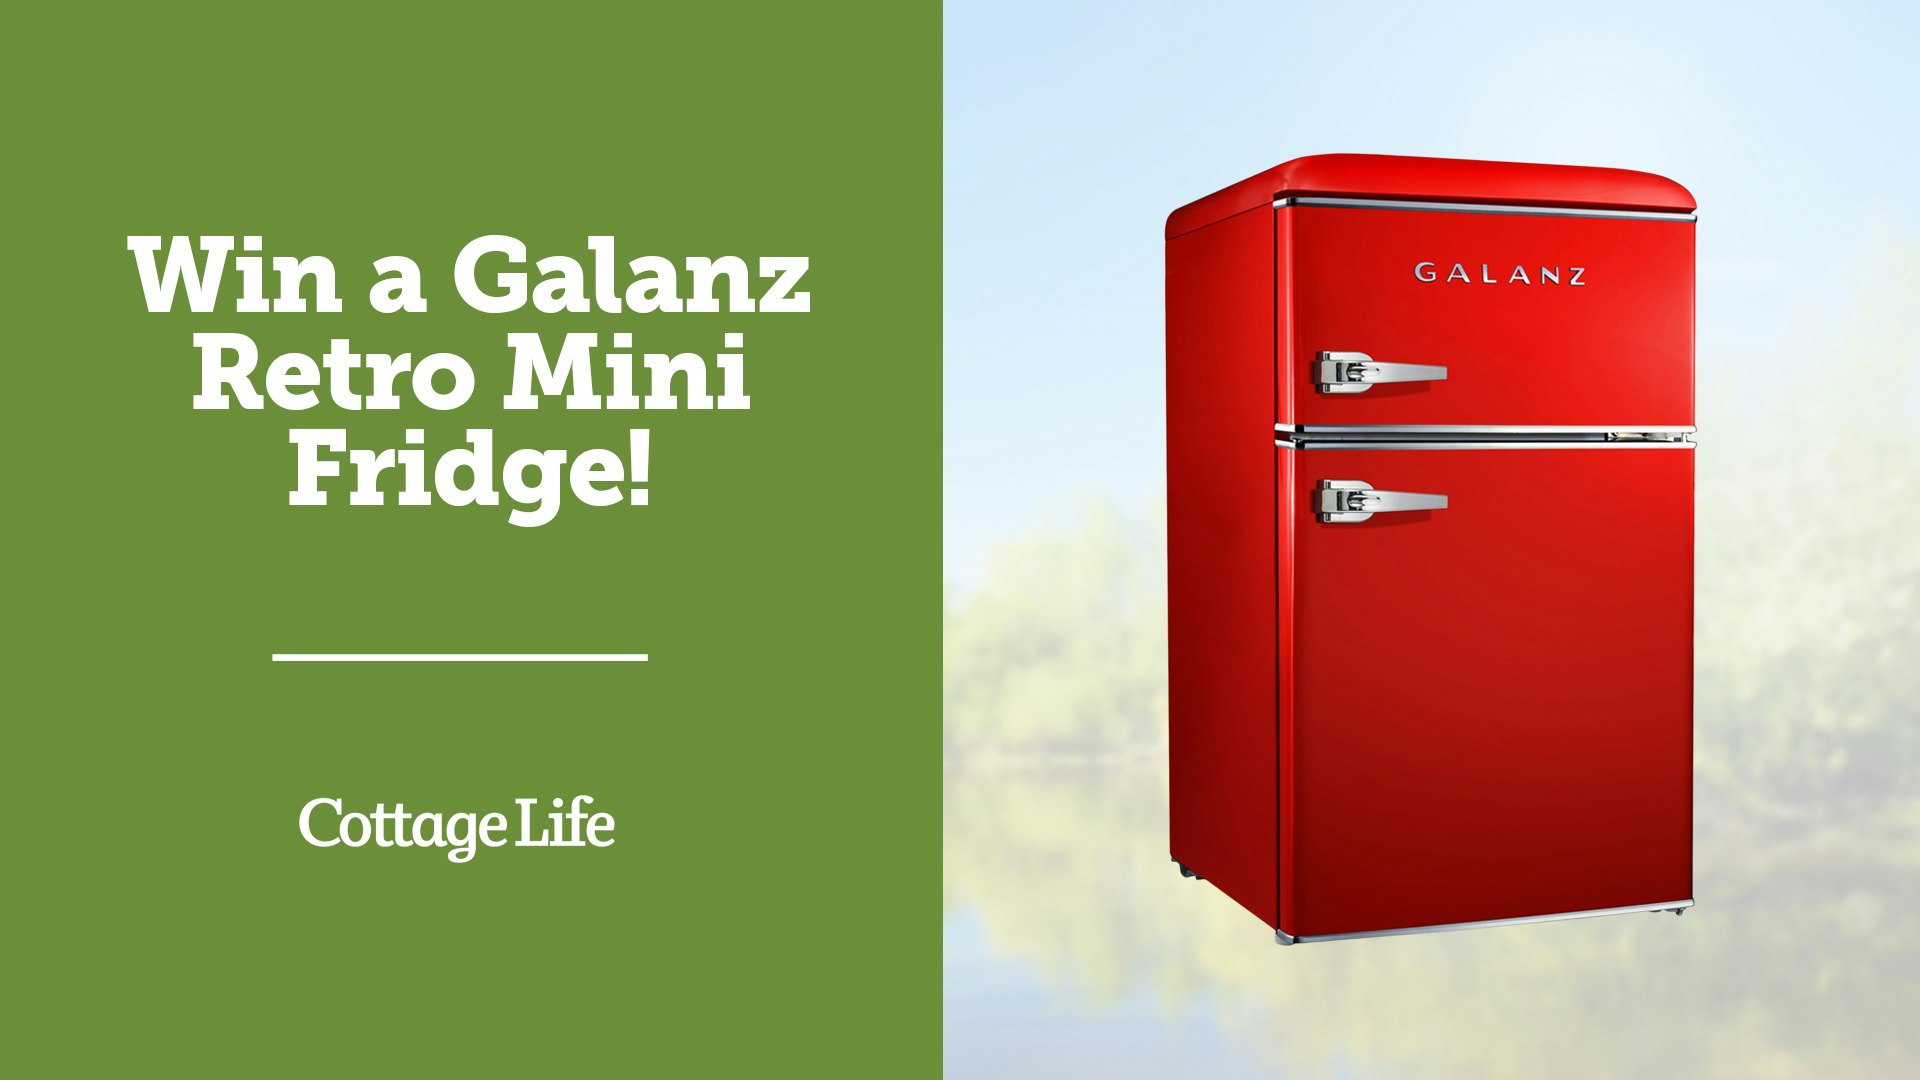 online contests, sweepstakes and giveaways - Win a Galanz Retro Mini Fridge with Cottage Life